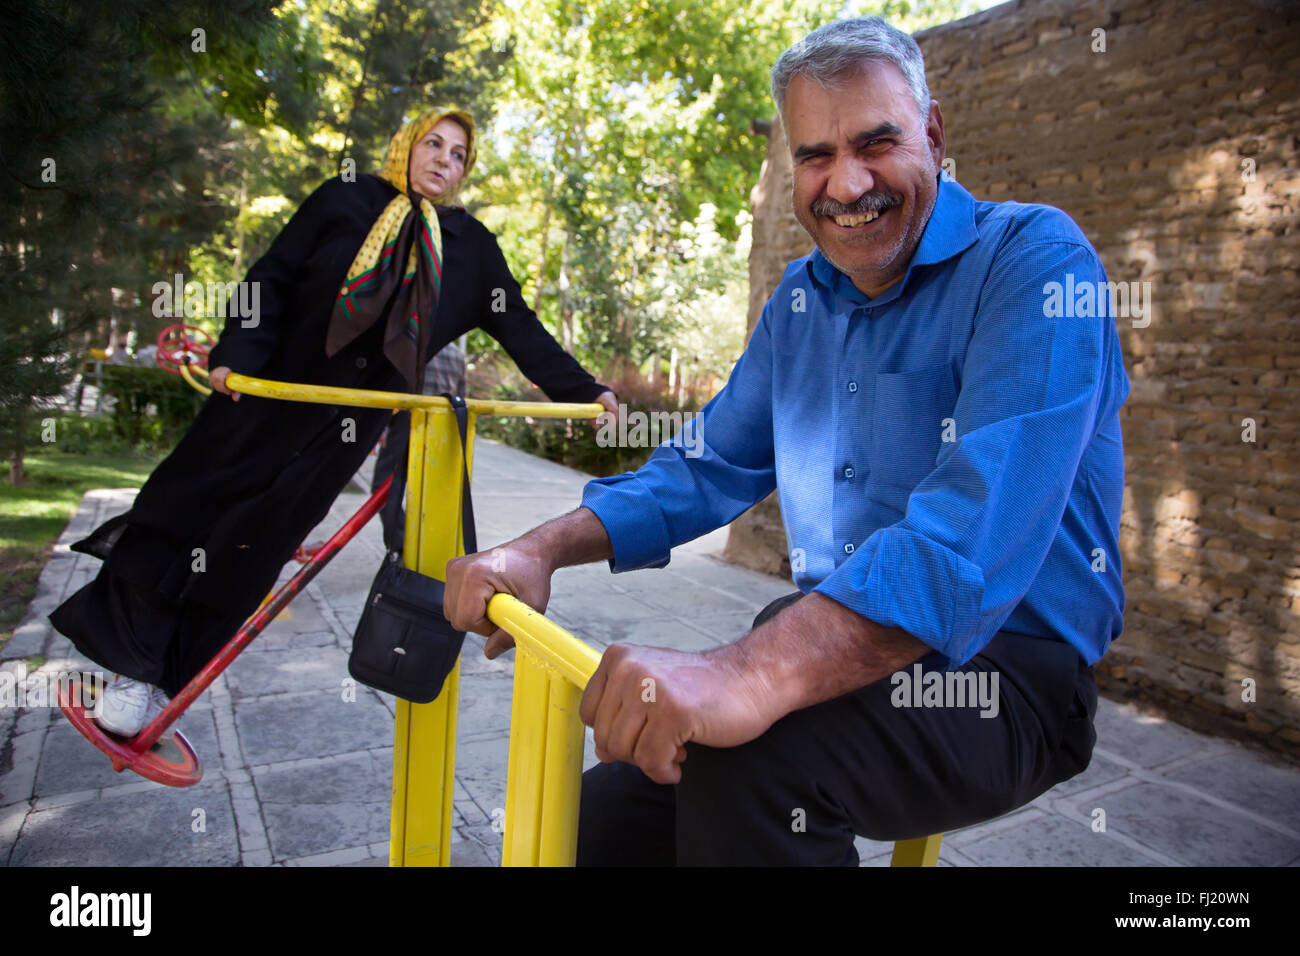 Iranian old couple making exercise in a park in Ispahan, Iran Stock Photo